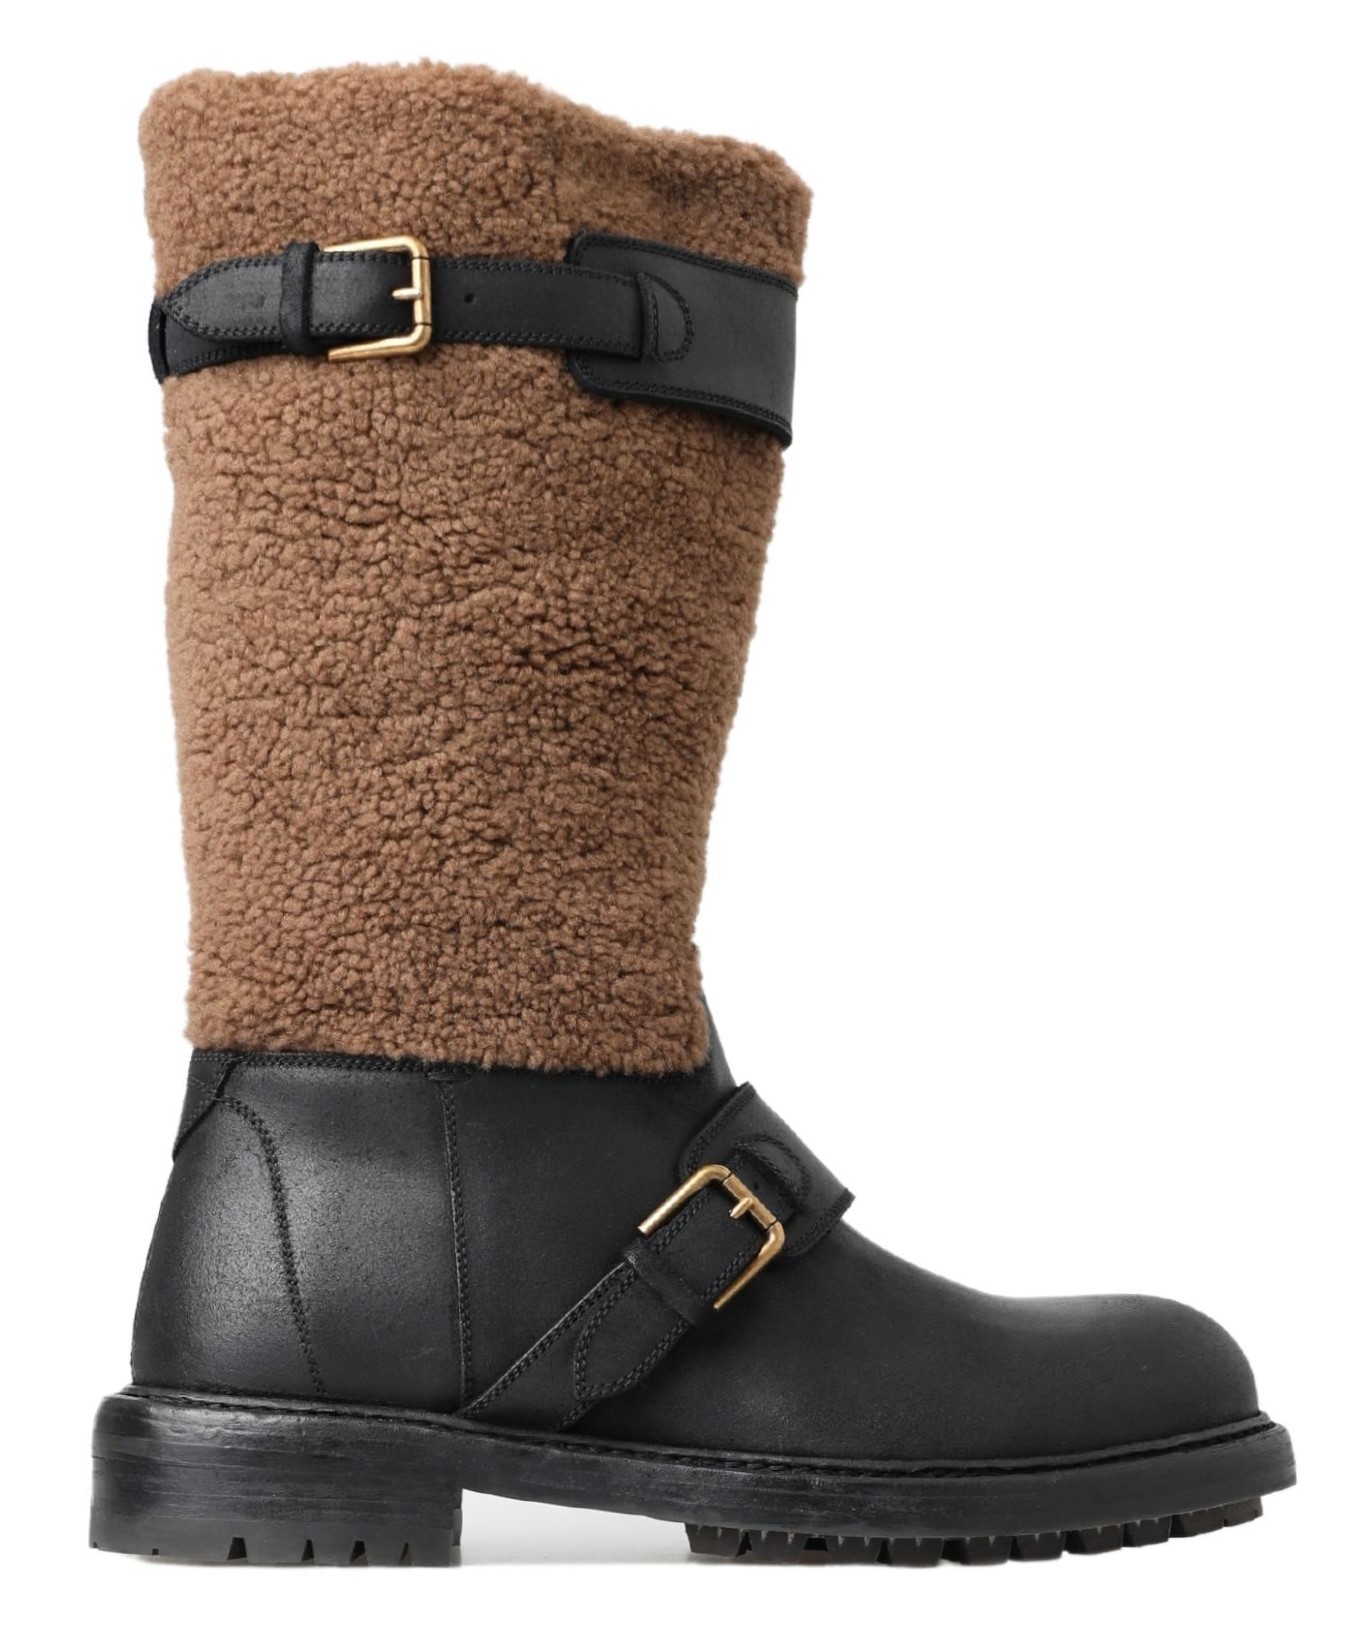 Dolce Gabbana Black Leather Brown Shearling Boots EU42US9